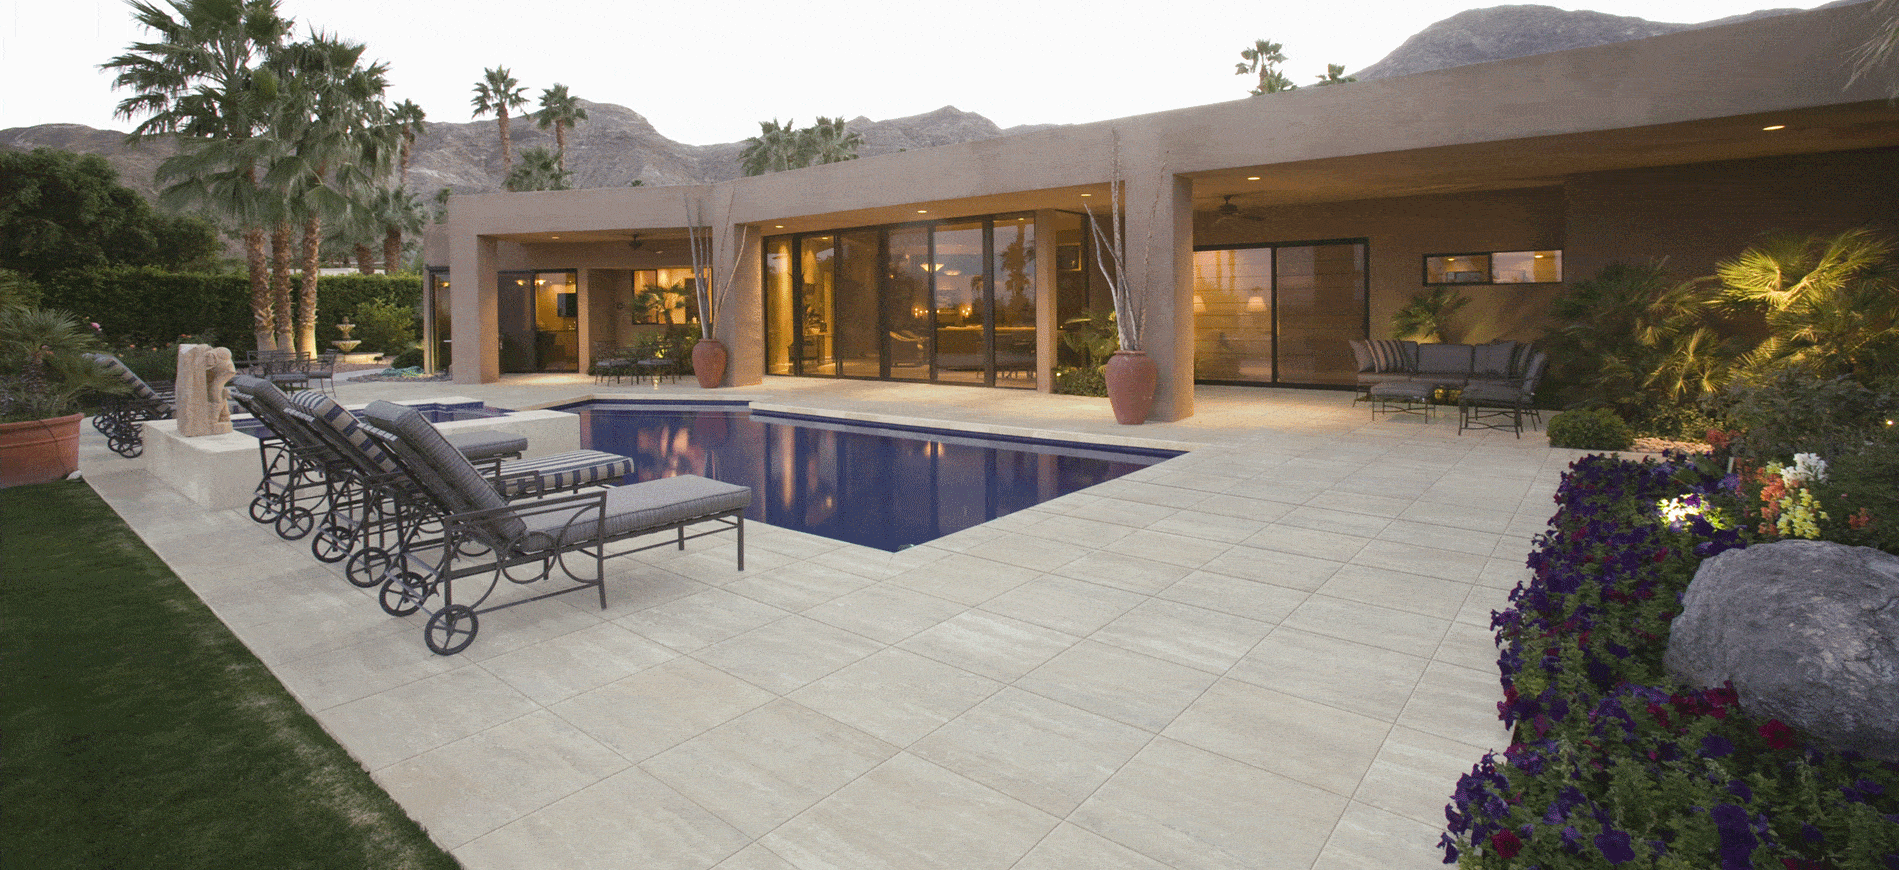 5 Quick & Easy Tips for Cleaning Travertine Pavers